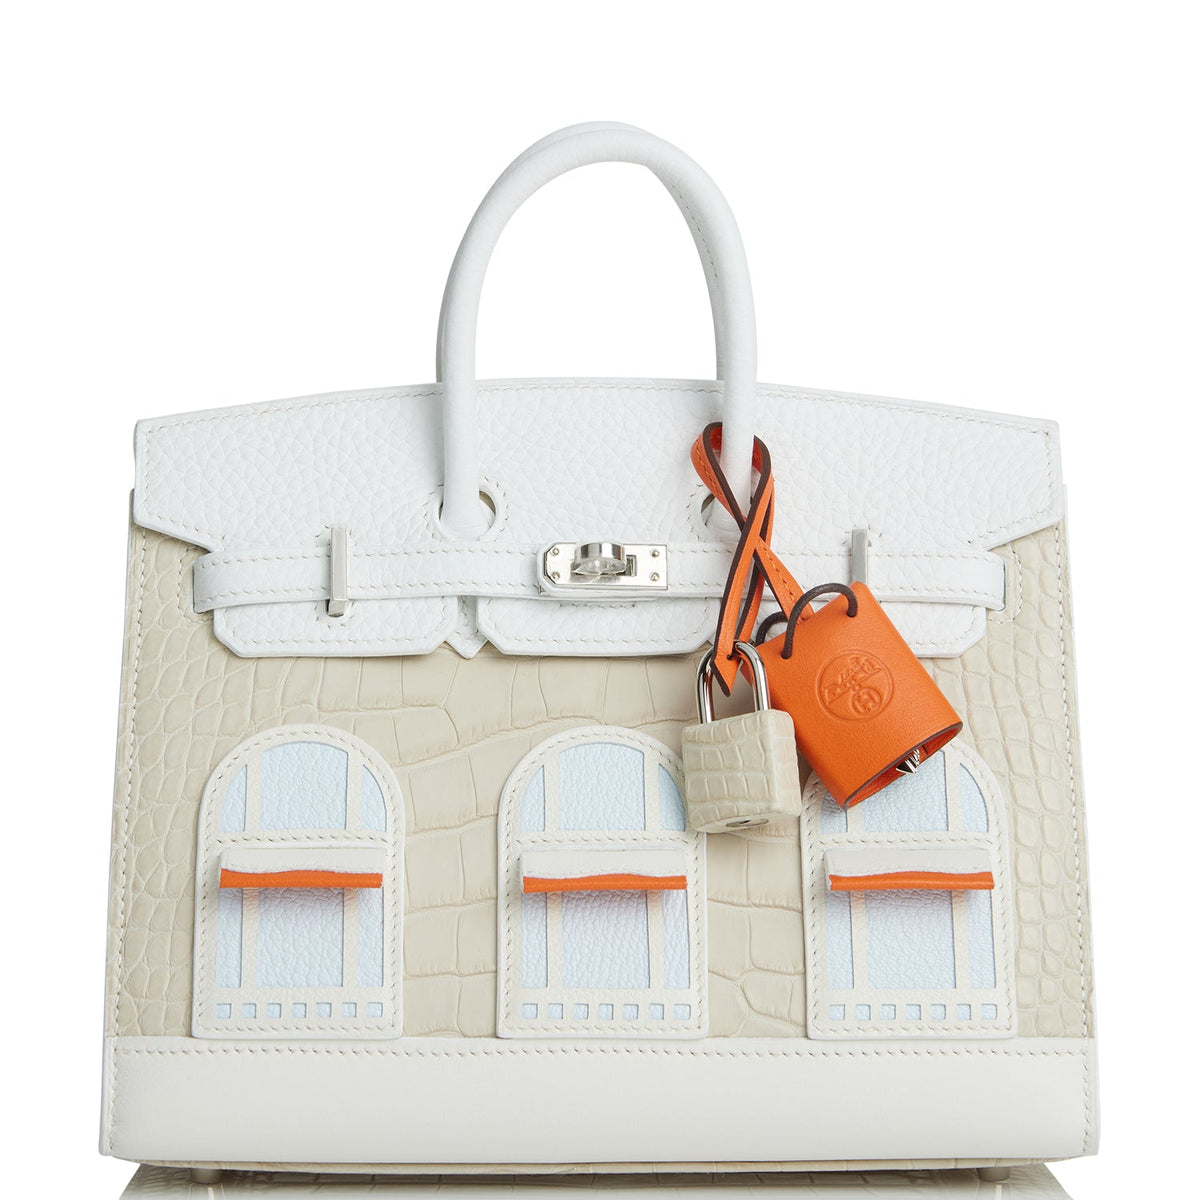 We can offer the benefits of Hermes Sac Faubourg Birkin 20 White